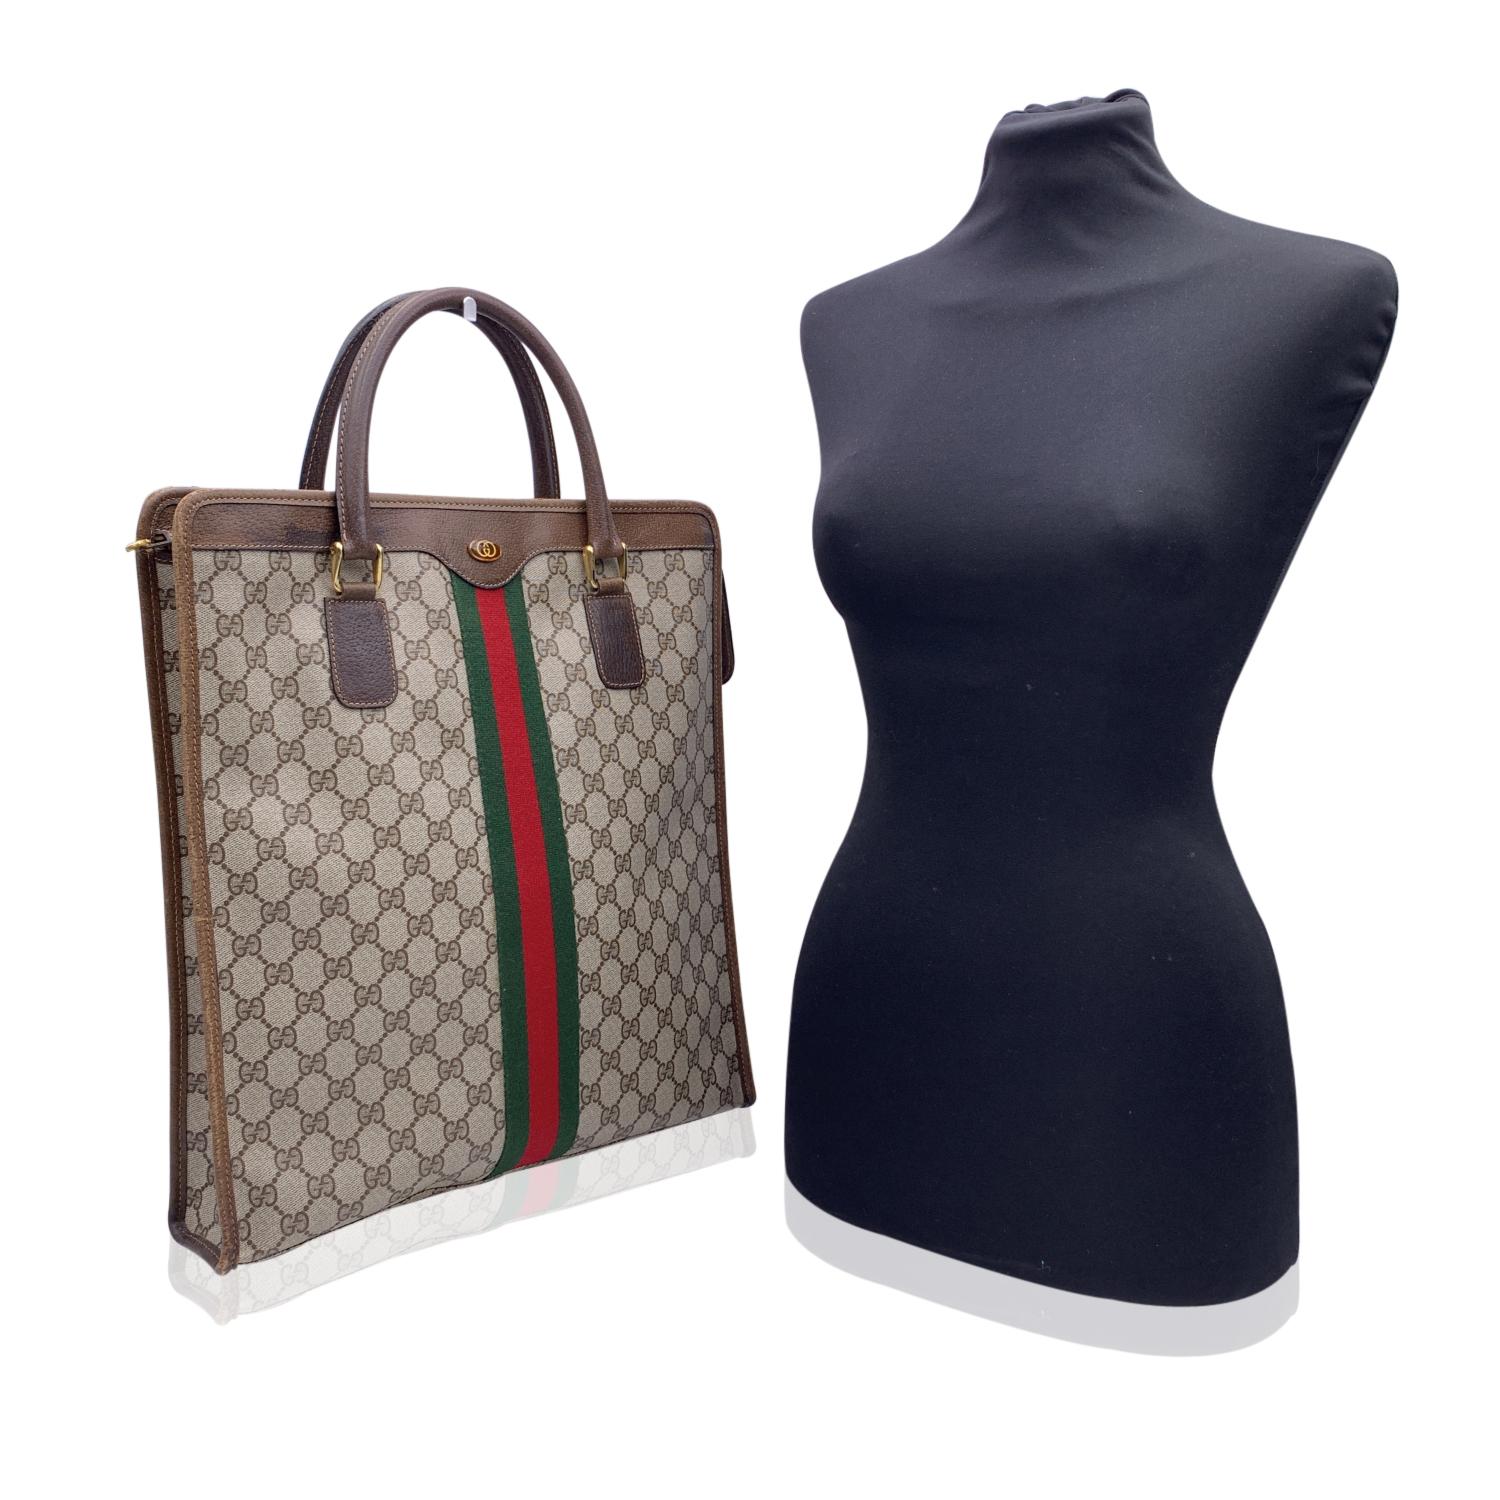 Beautiful Gucci tote made in brown monogram canvas with brown leather trim and handles. Green/Red/Green stripes on the front and on the back. Upper zipper closure. Beige lining. 1 side zip pocket inside. 'GUCCI Accessory collection - Made in Italy'